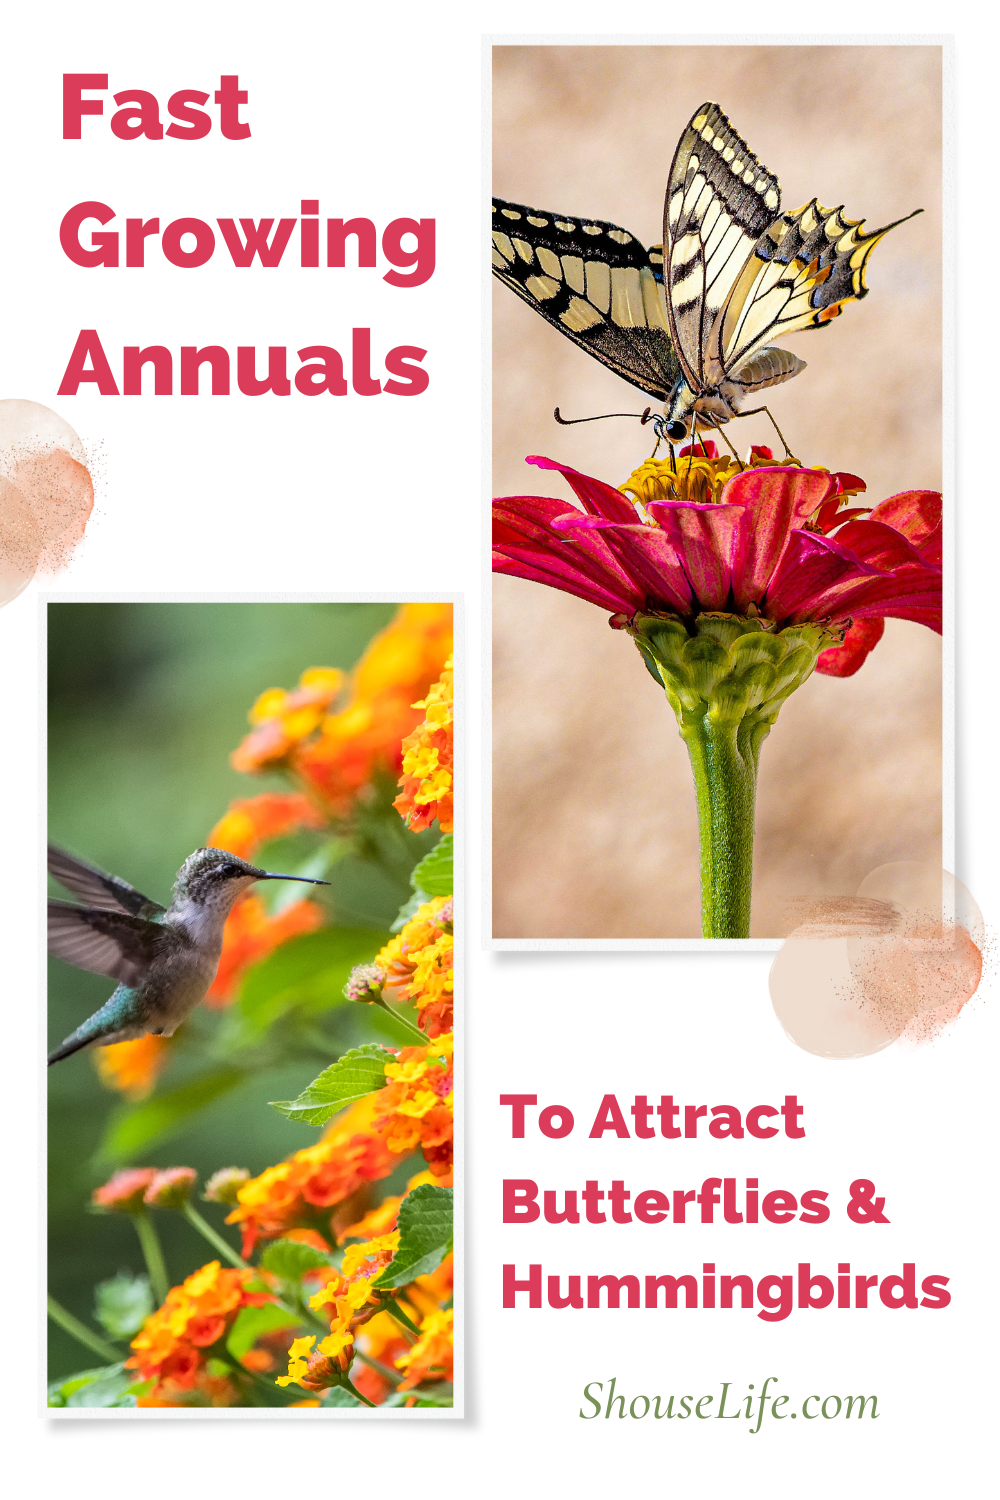 Fast Growing Annuals That Attract Butterflies And Hummingbirds